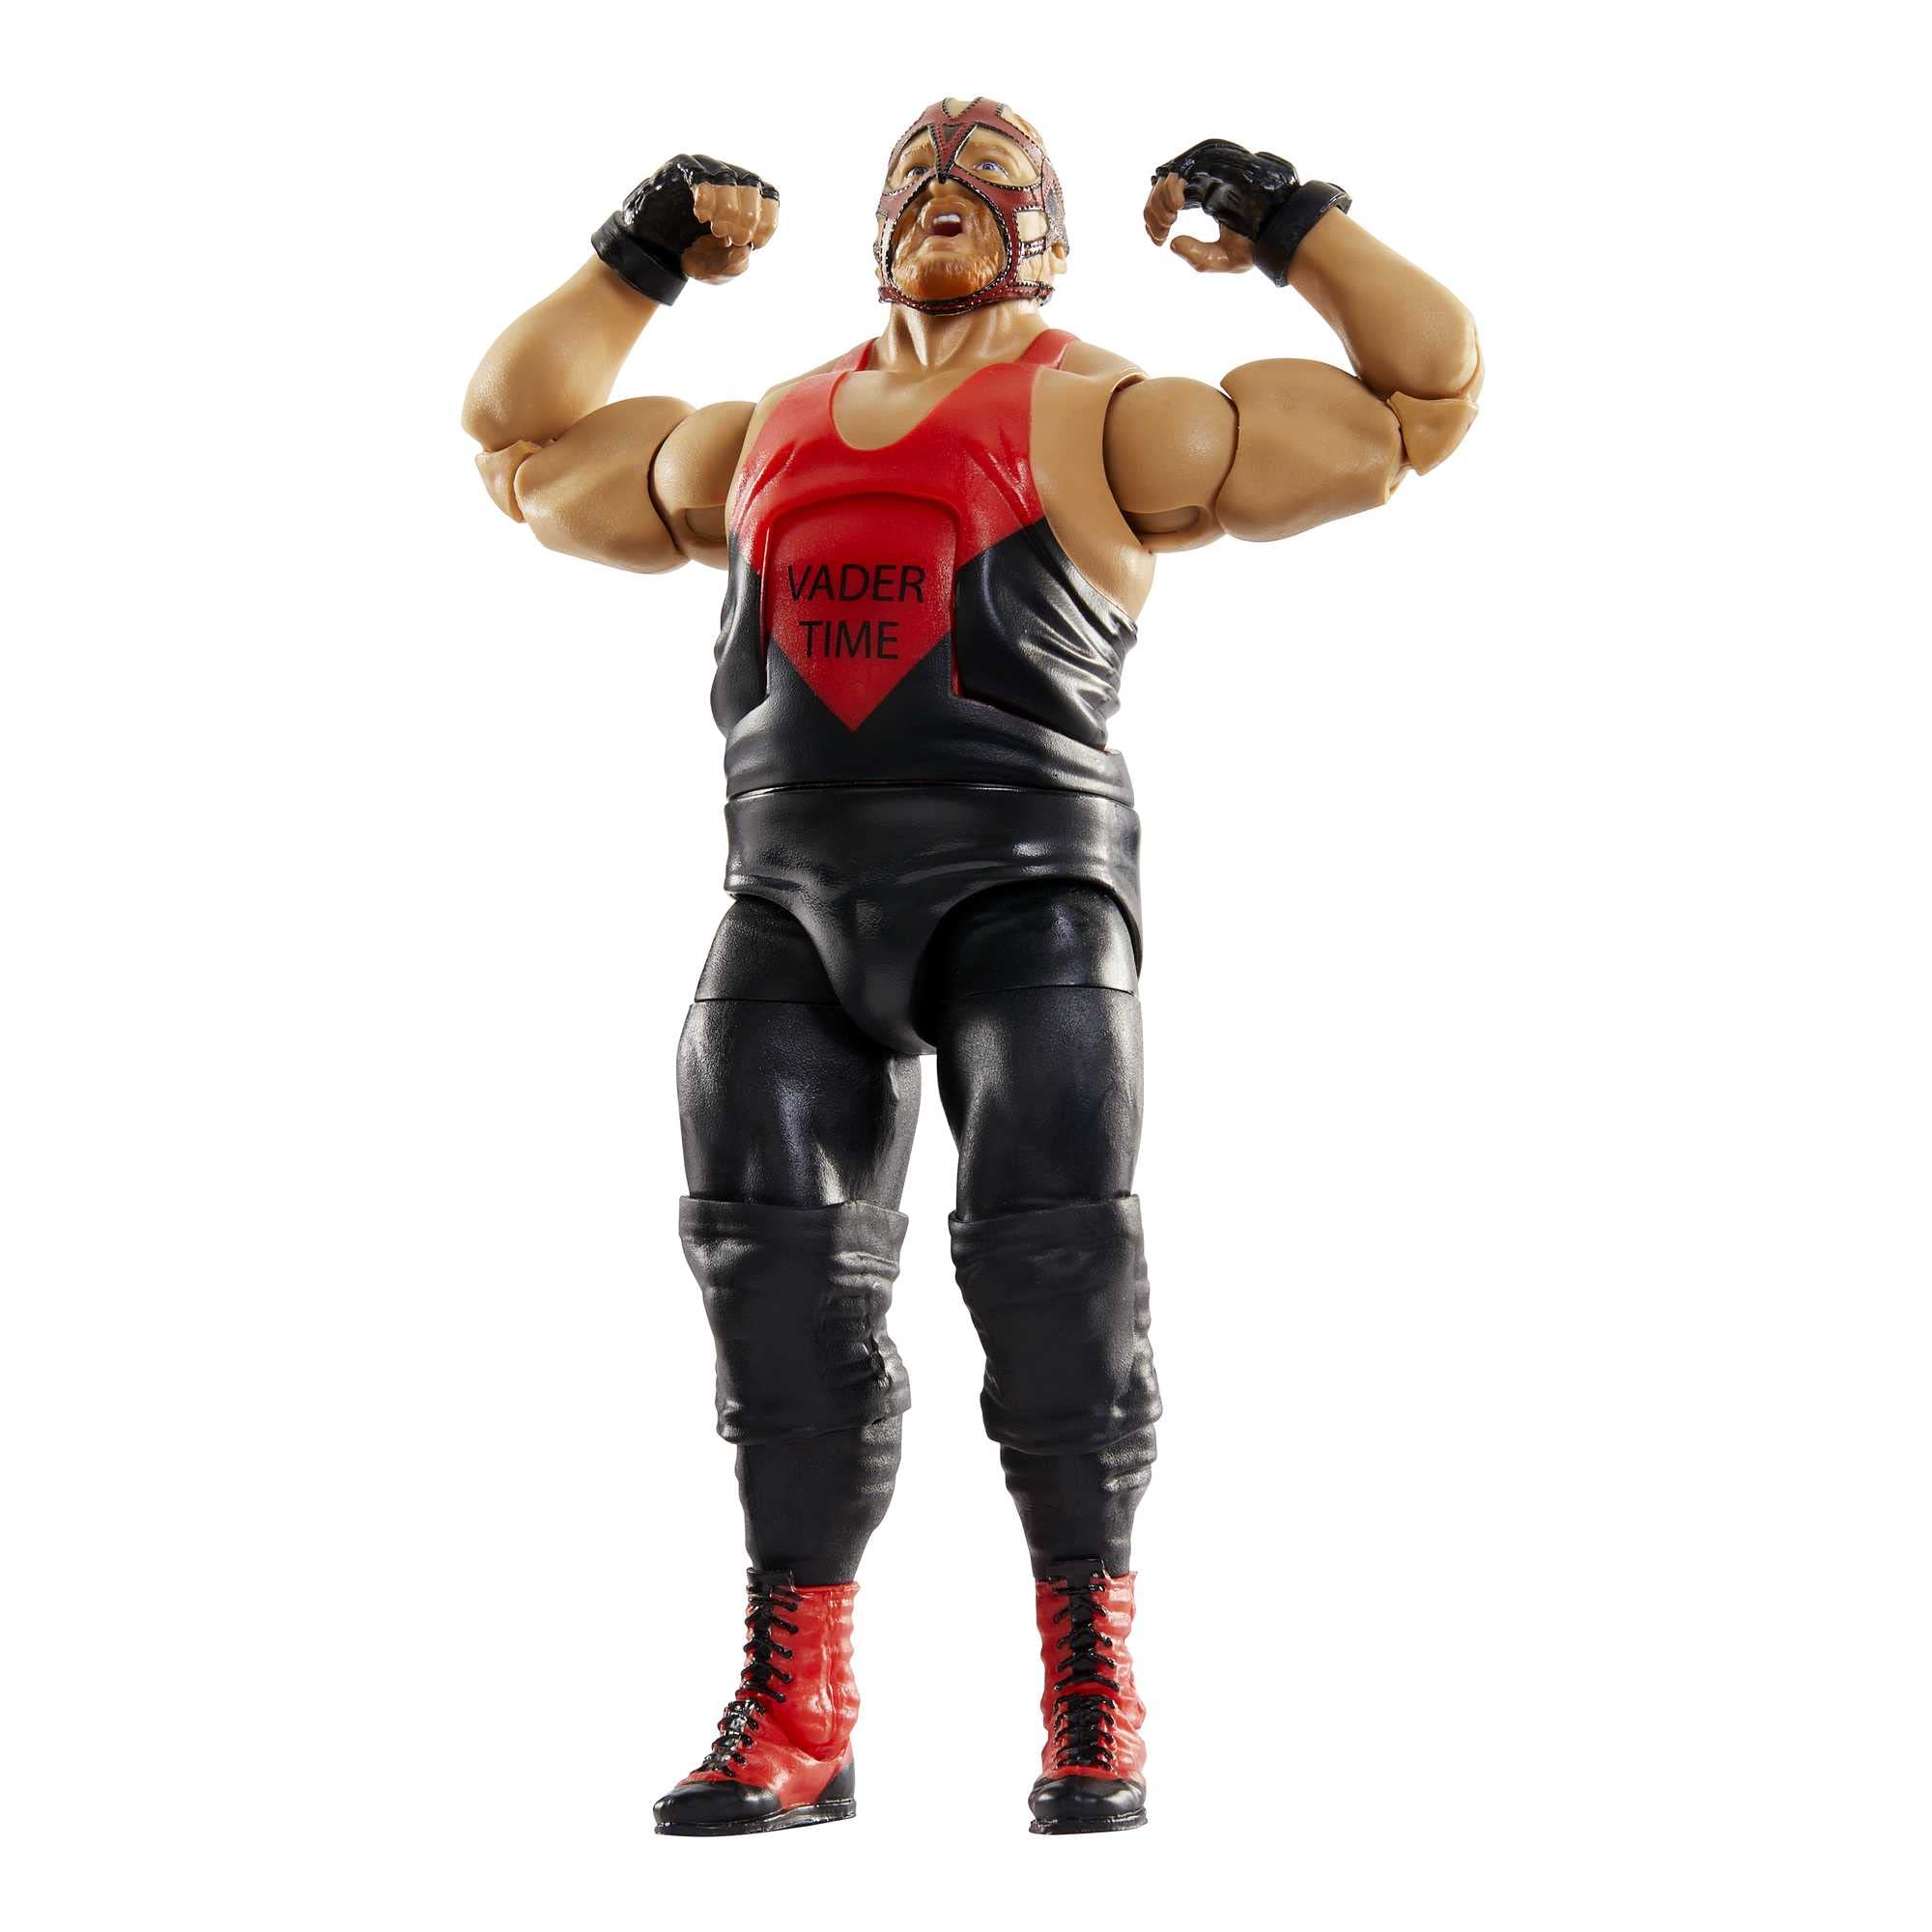 WWE Elite Action Figure Royal Rumble Vader with Accessory and Dok Hendrix Build-A-Figure Parts​, HKP16